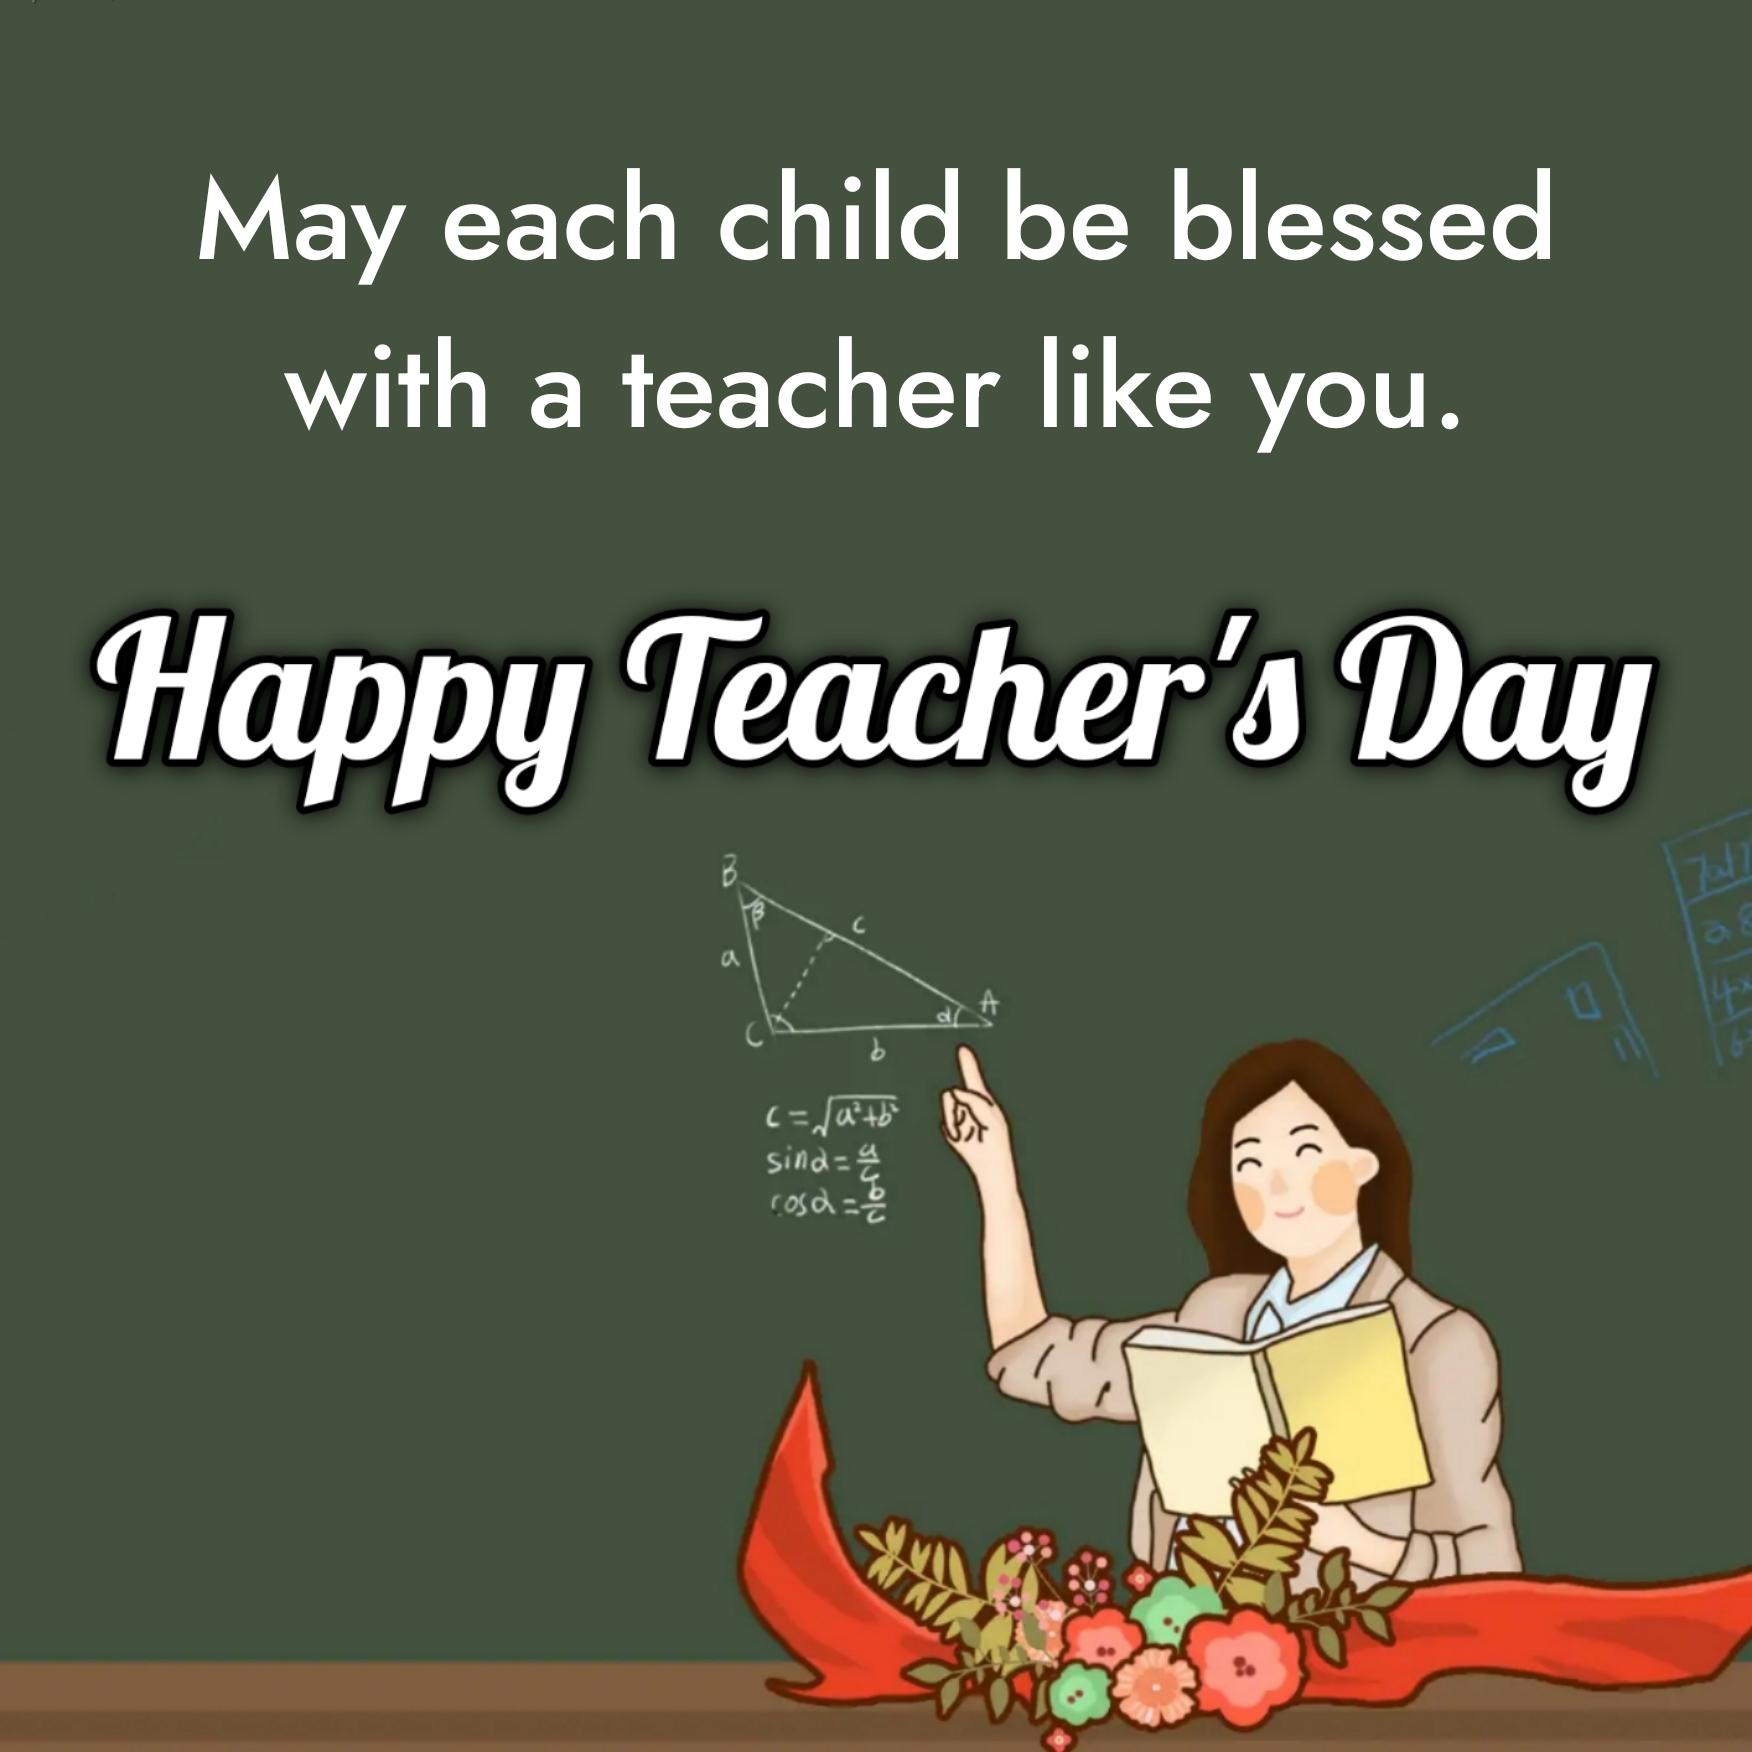 May each child be blessed with a teacher like you